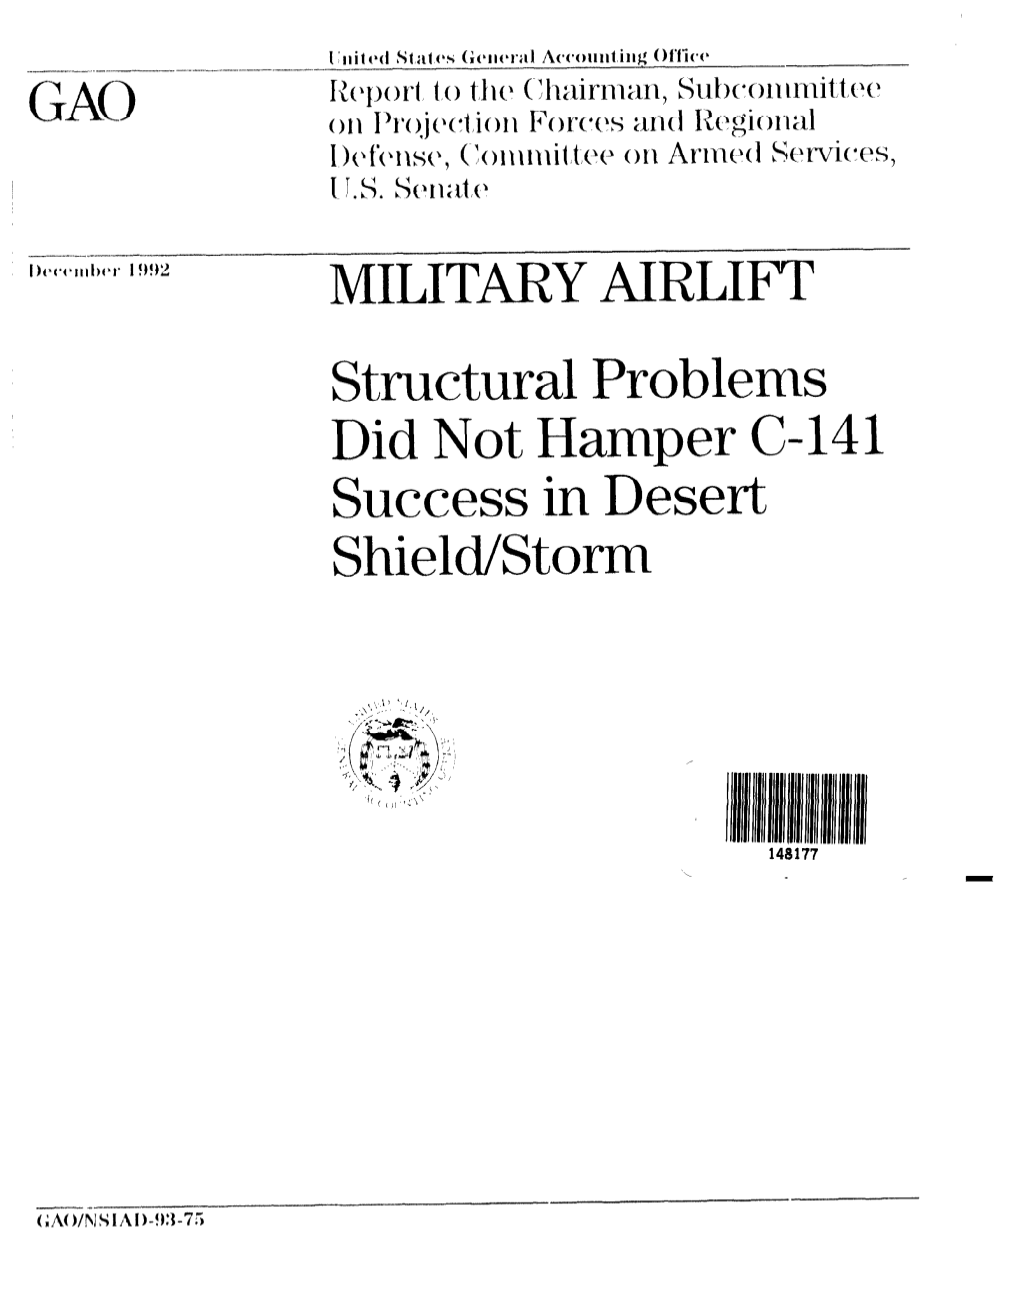 NSIAD-93-75 Military Airlift: Structural Problems Did Not Hamper C-141